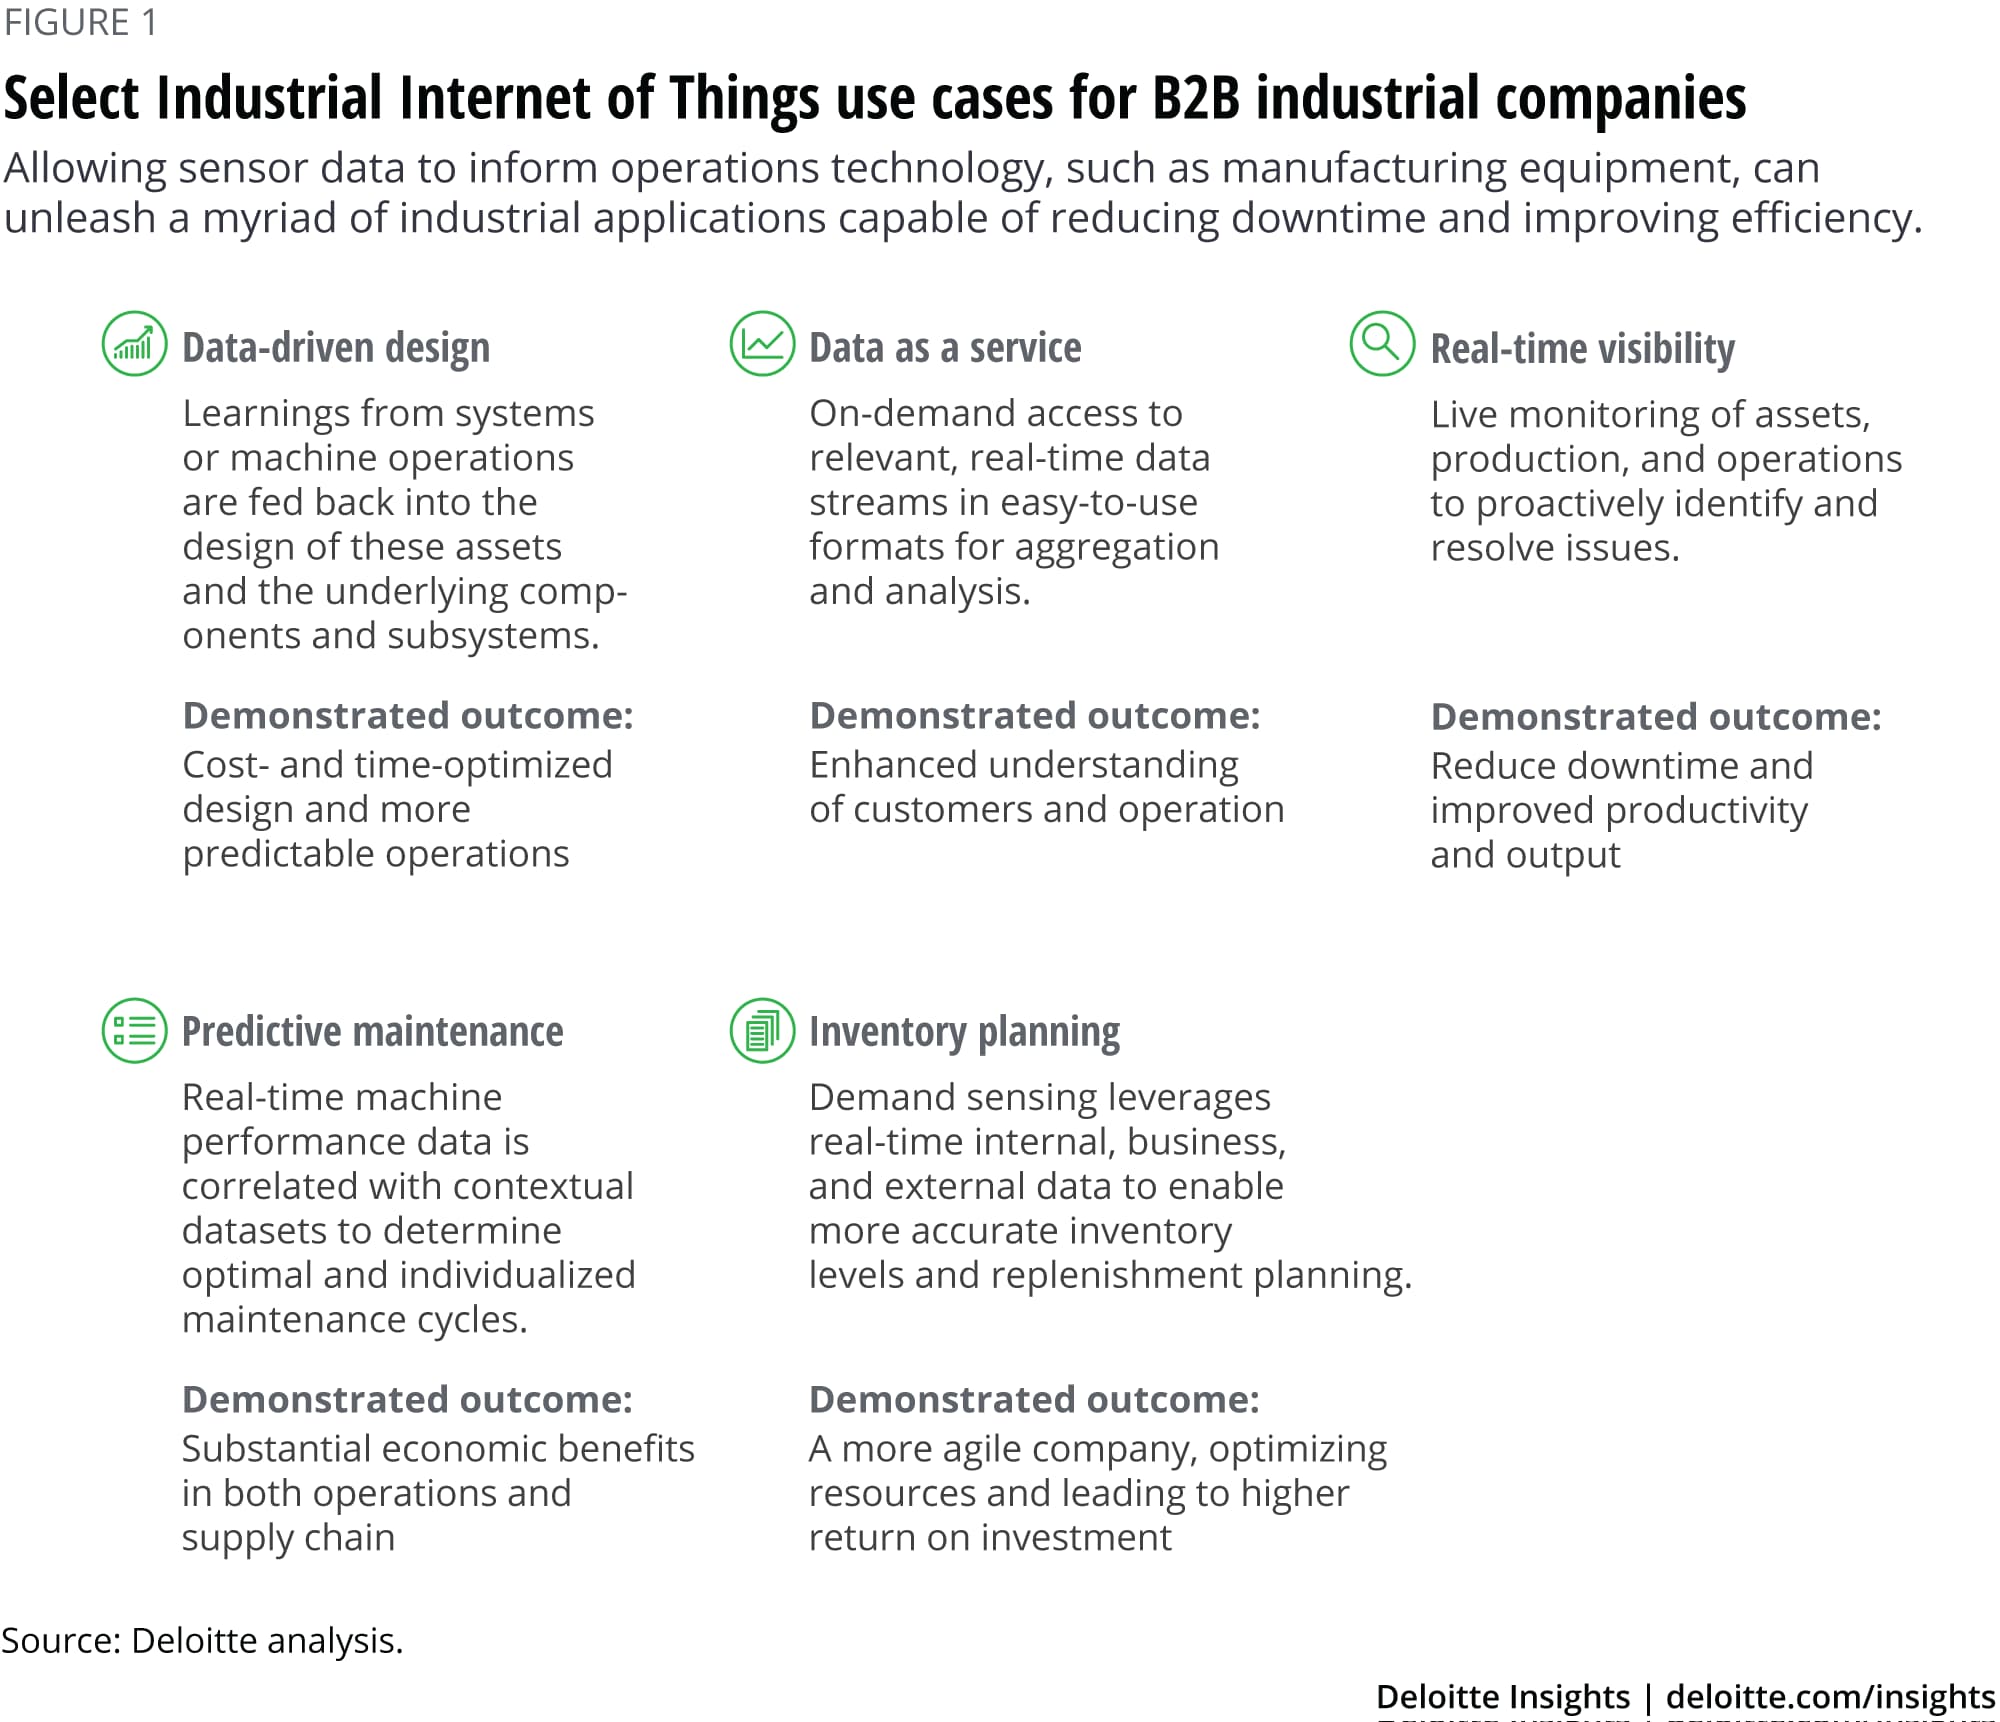 Select Industrial Internet of Things use cases for B2B industrial companies